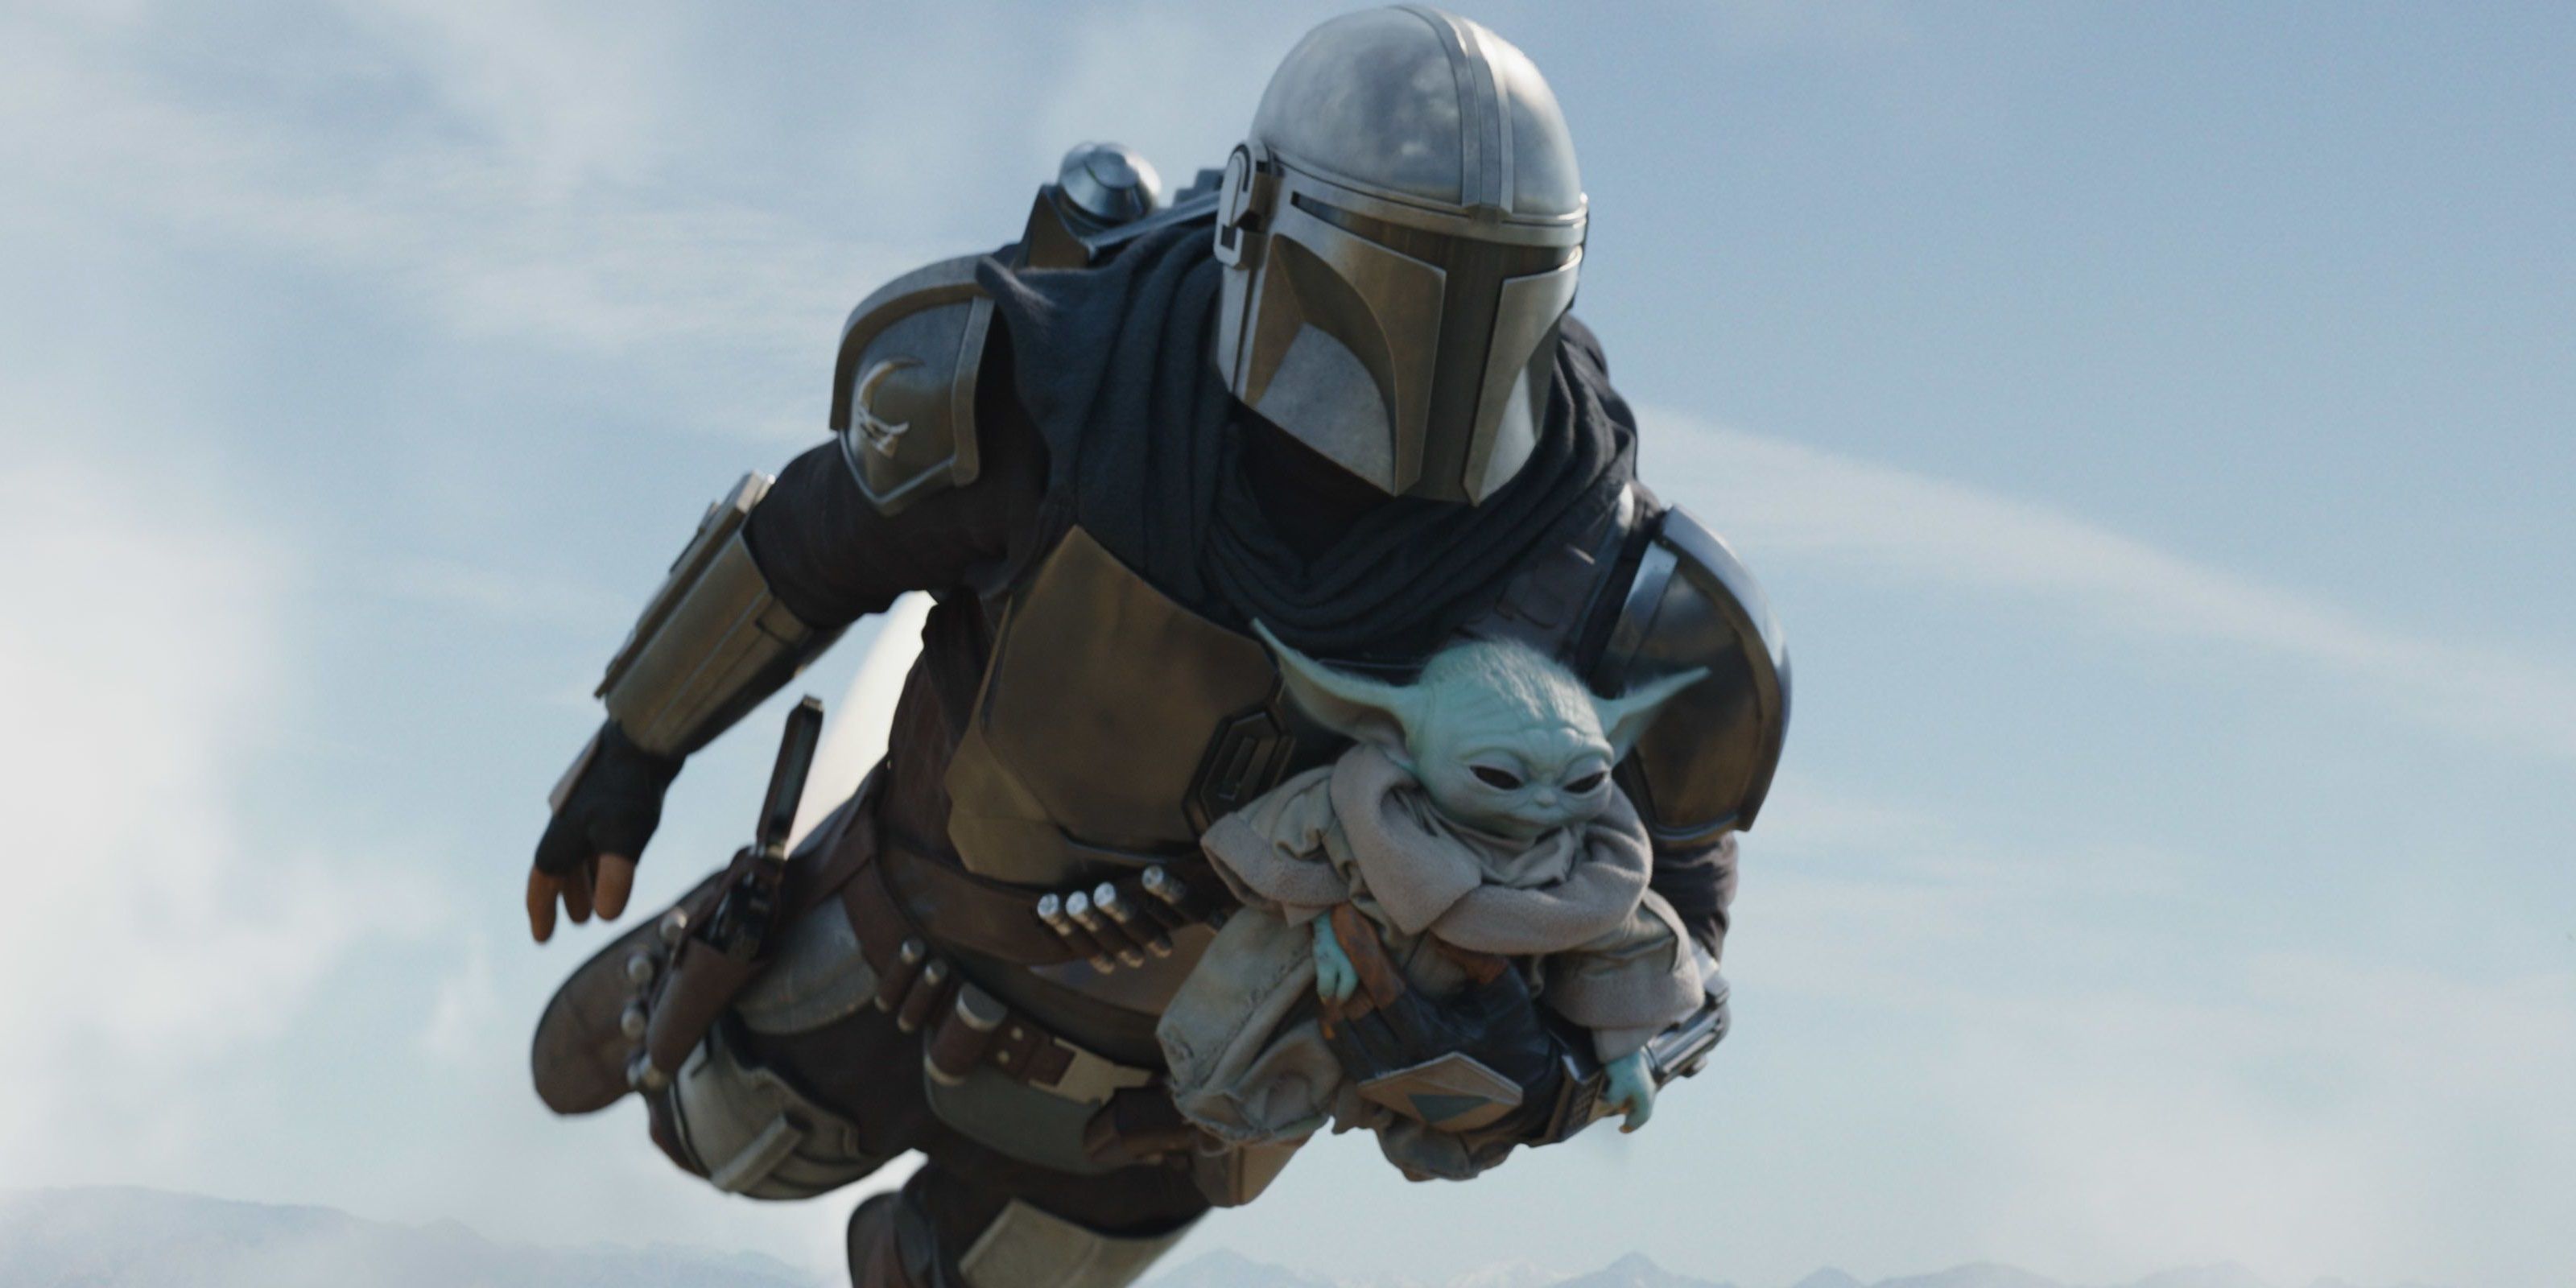 Mando flying and holding Grogu in The Mandalorian